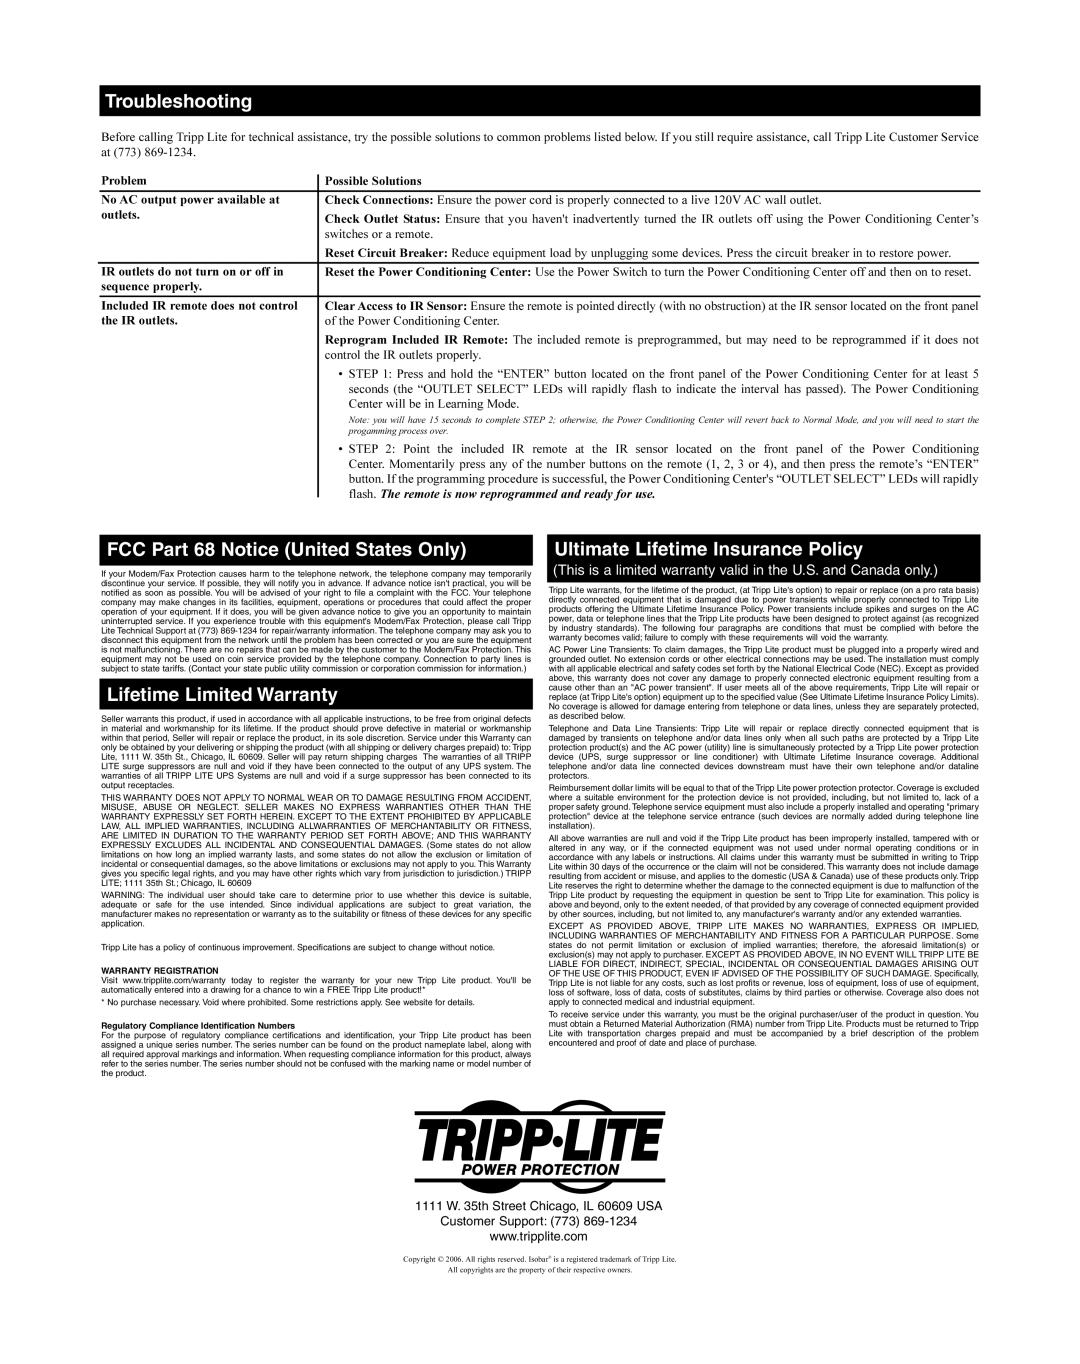 Tripp Lite HT7300PC owner manual Troubleshooting, FCC Part 68 Notice United States Only, Lifetime Limited Warranty 